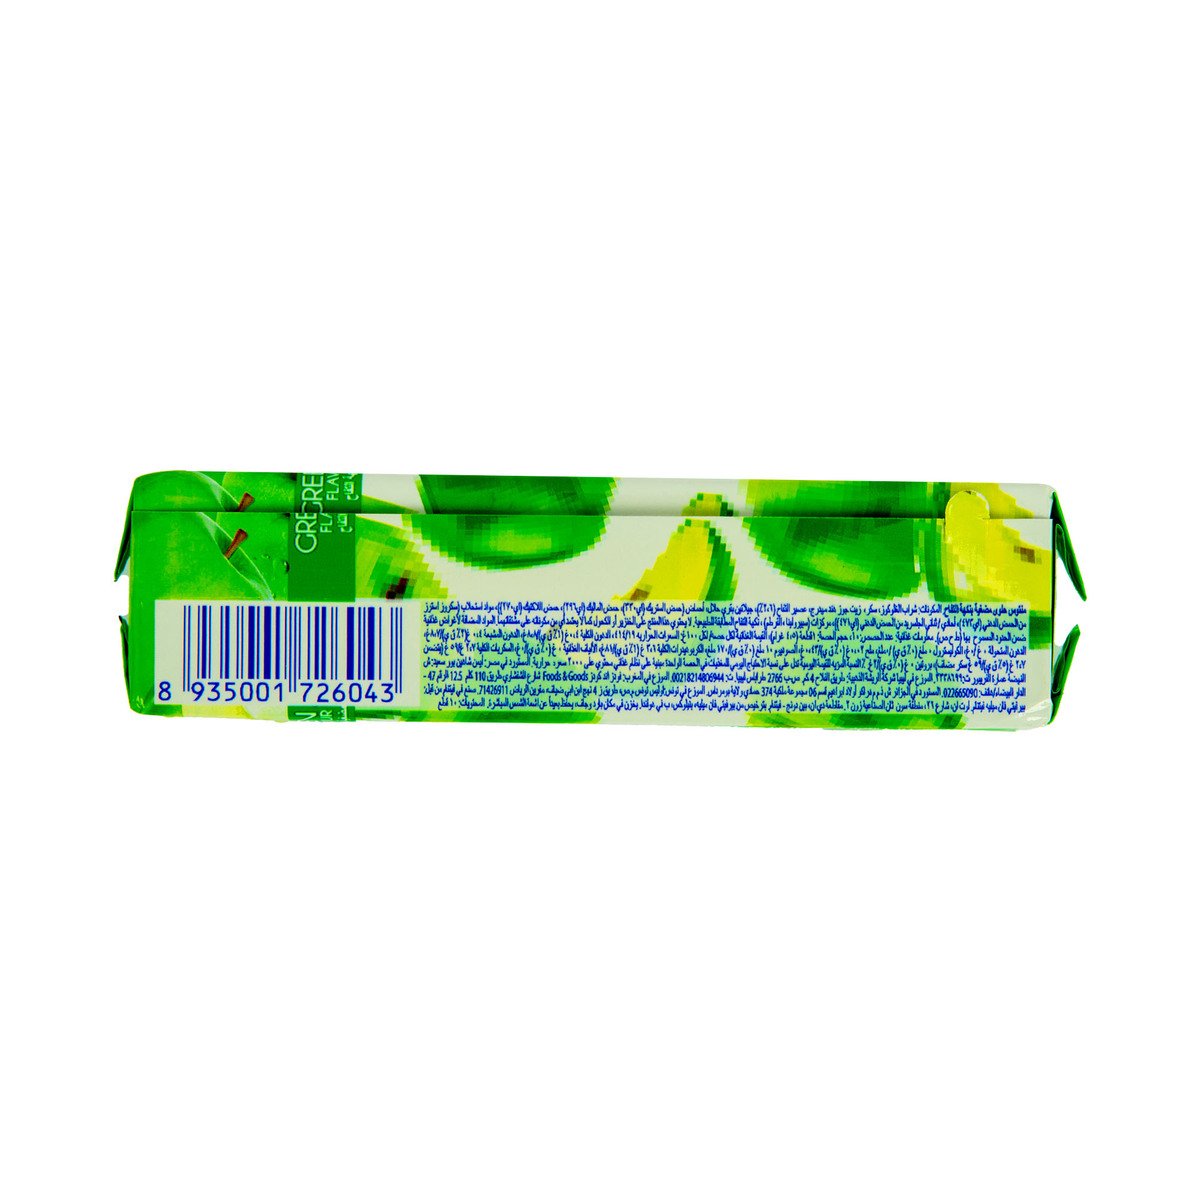 Mentos Incredible Chew with Green Apple Flavour, 45 g